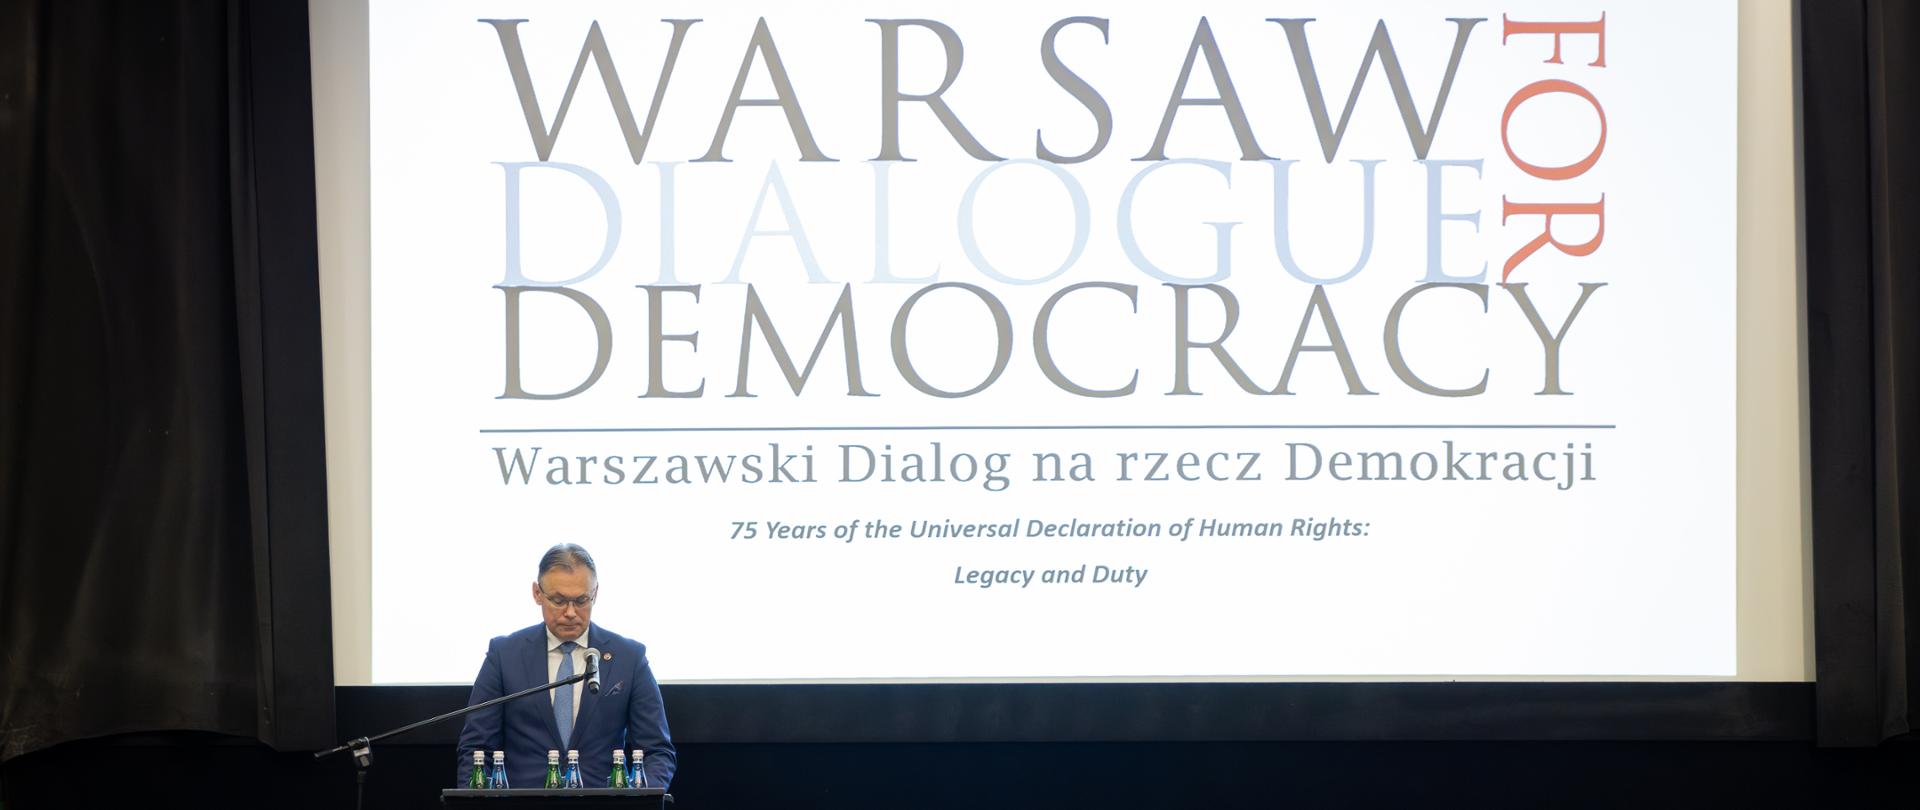 Warsaw Dialogue for Democracy with the participation of Deputy Minister Mularczyk